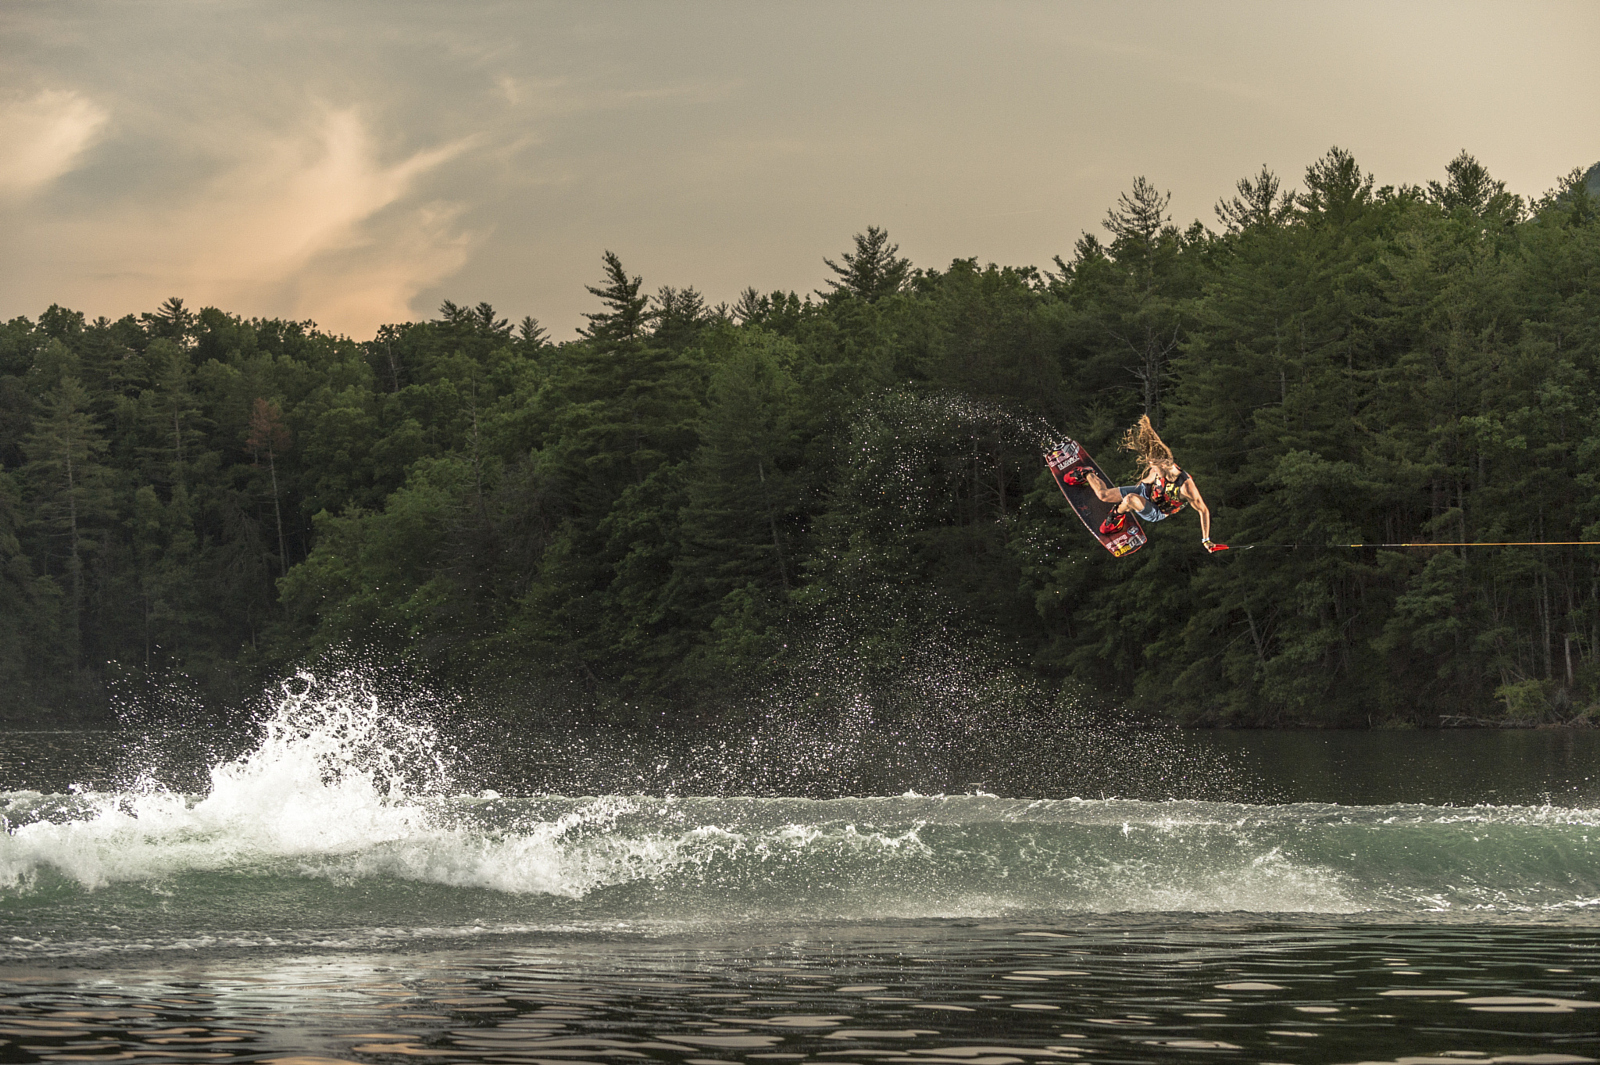 How Flash Helped A Pro Photographer Transition From Winter Sports To Wakeboarding